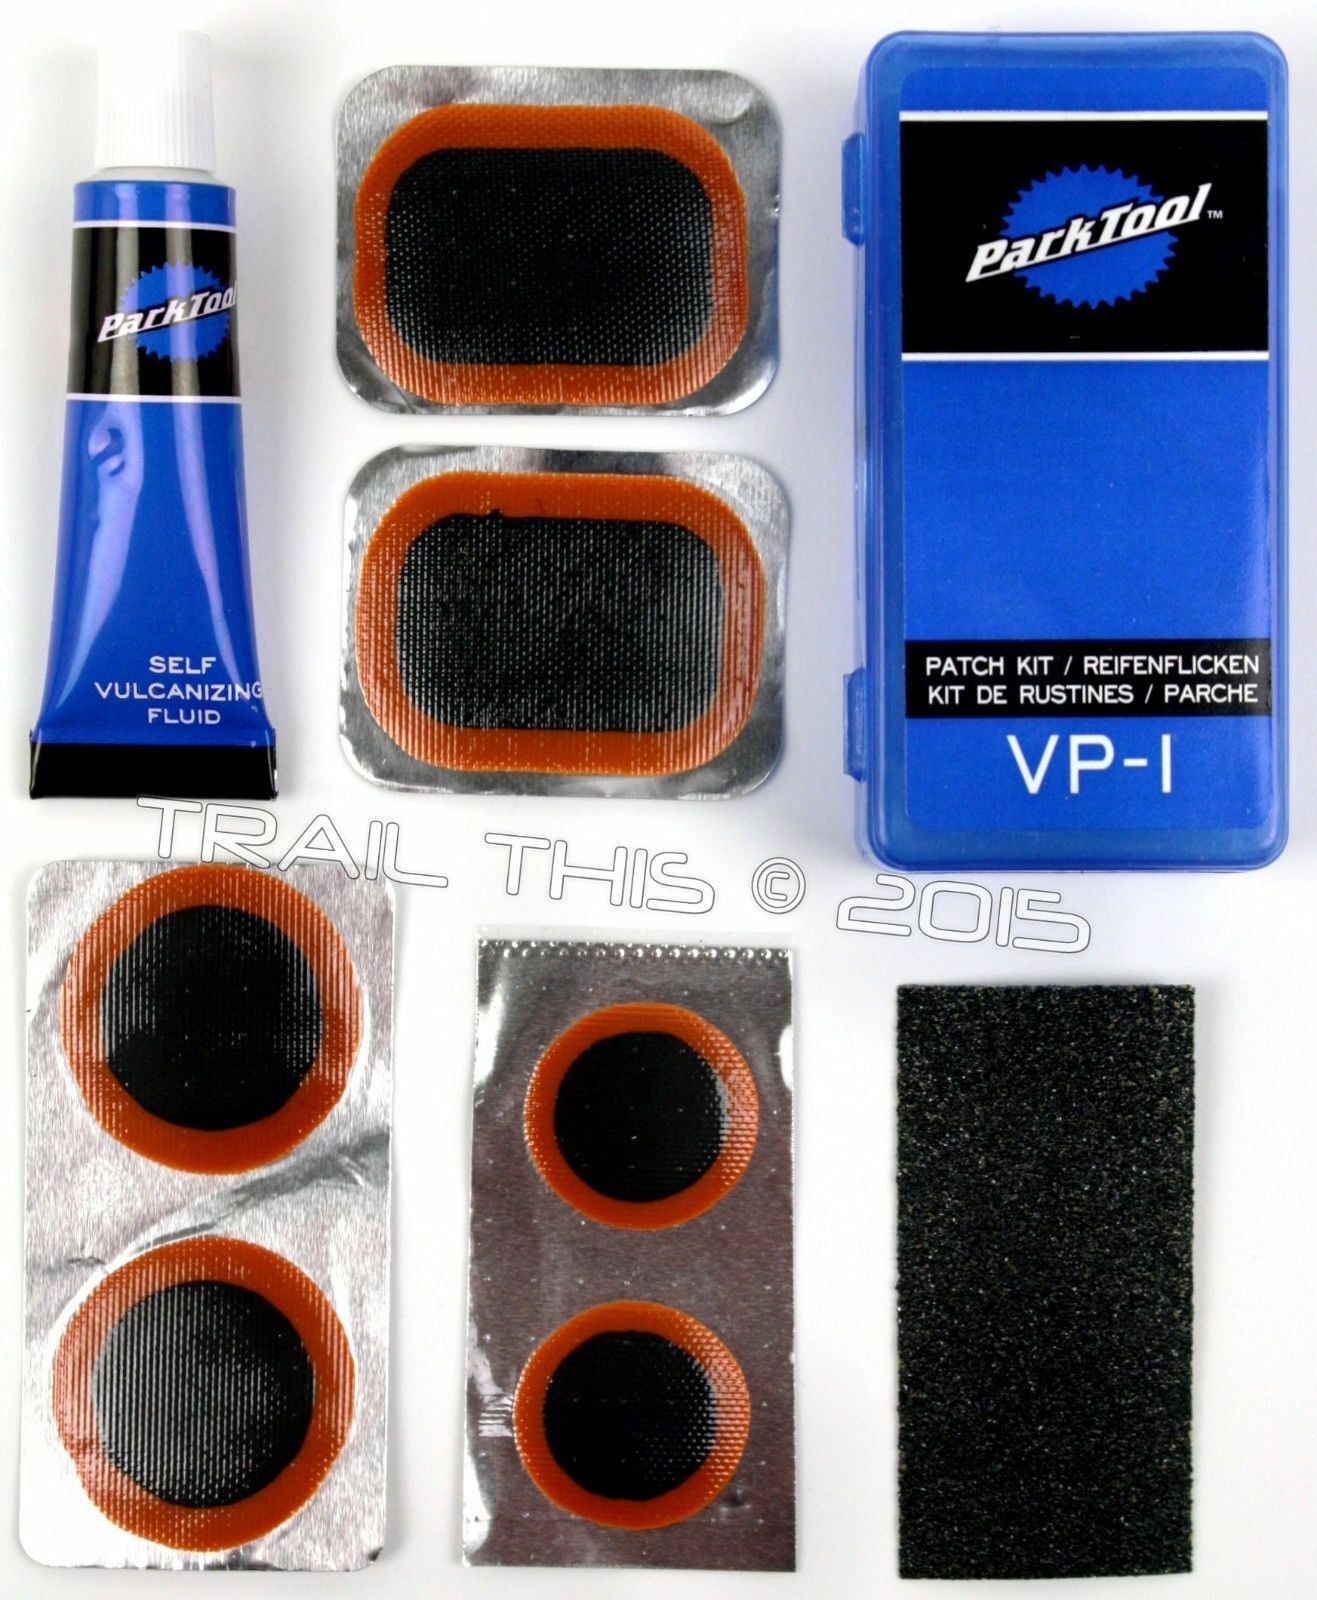 Park Tool Vp-1 Bicycle Tire Tube Vulcanizing Patch Repair Kit - 6-patches + Glue